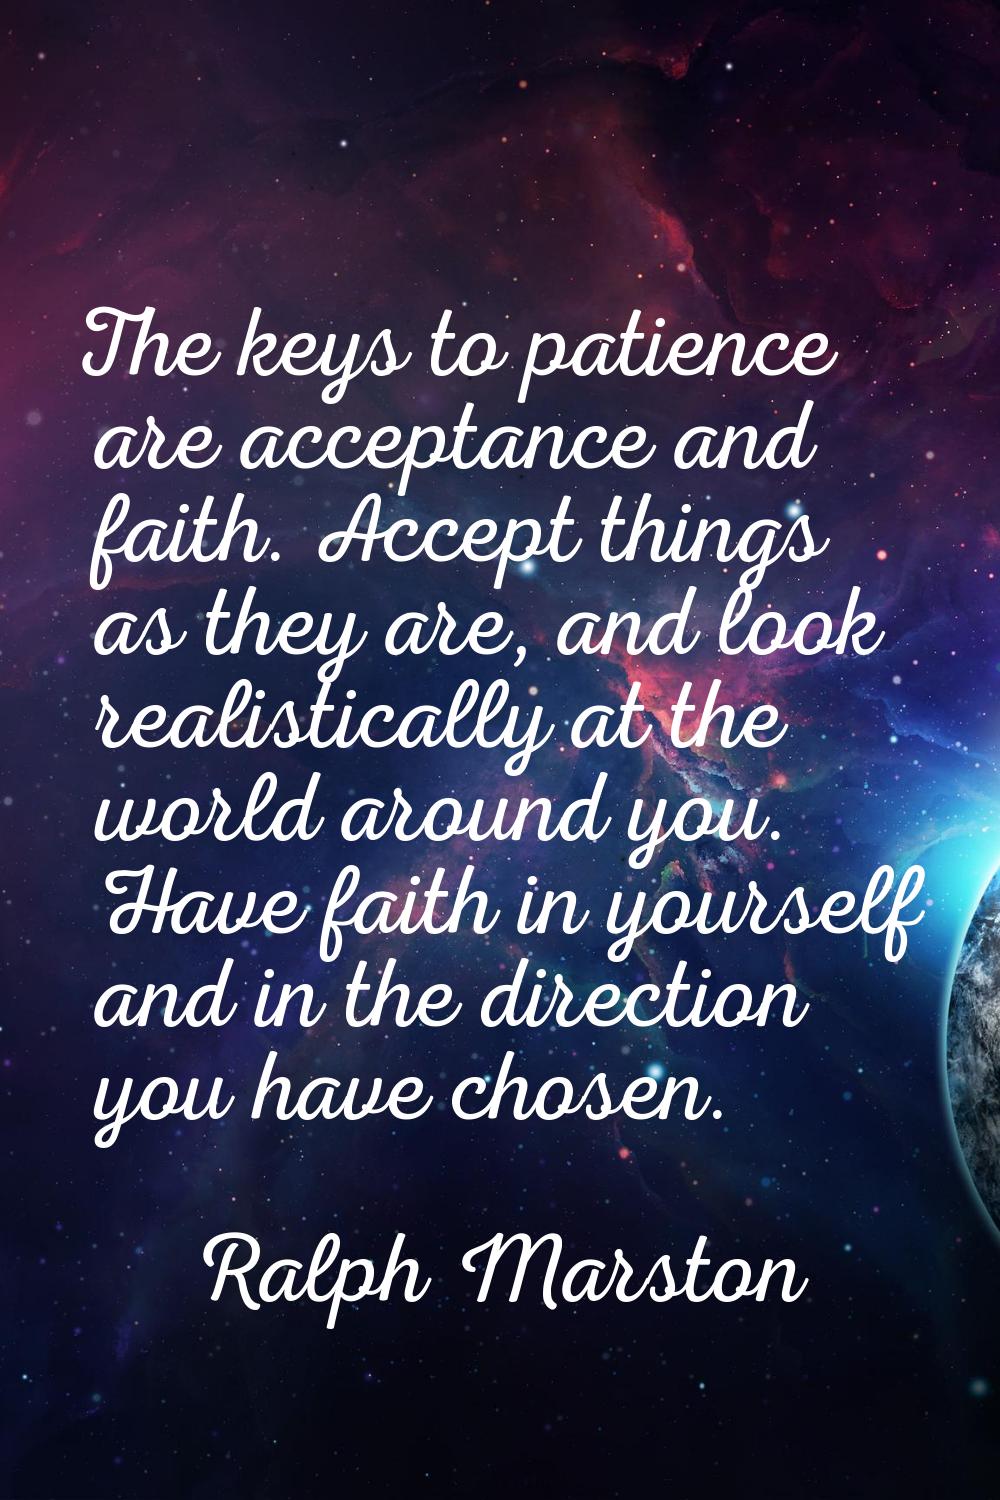 The keys to patience are acceptance and faith. Accept things as they are, and look realistically at